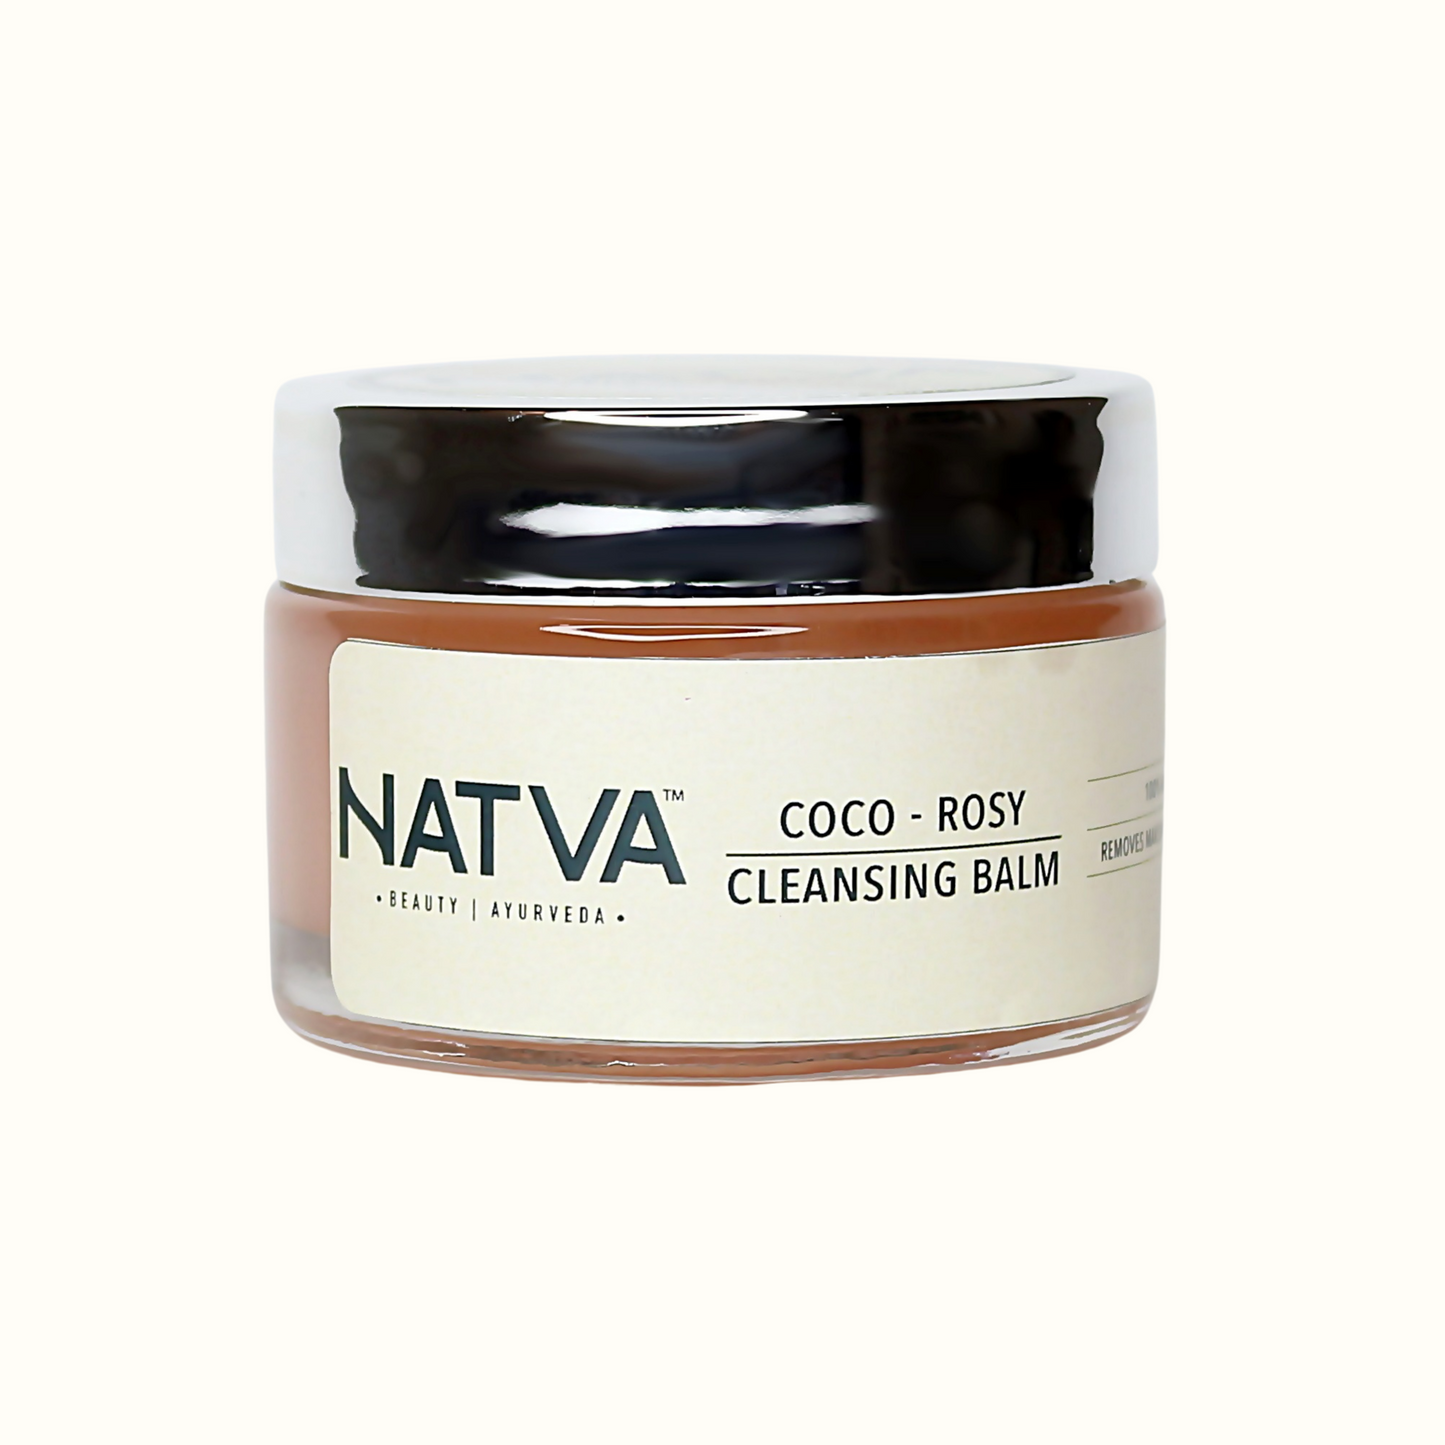 Coco - Rosy Cleansing Balm